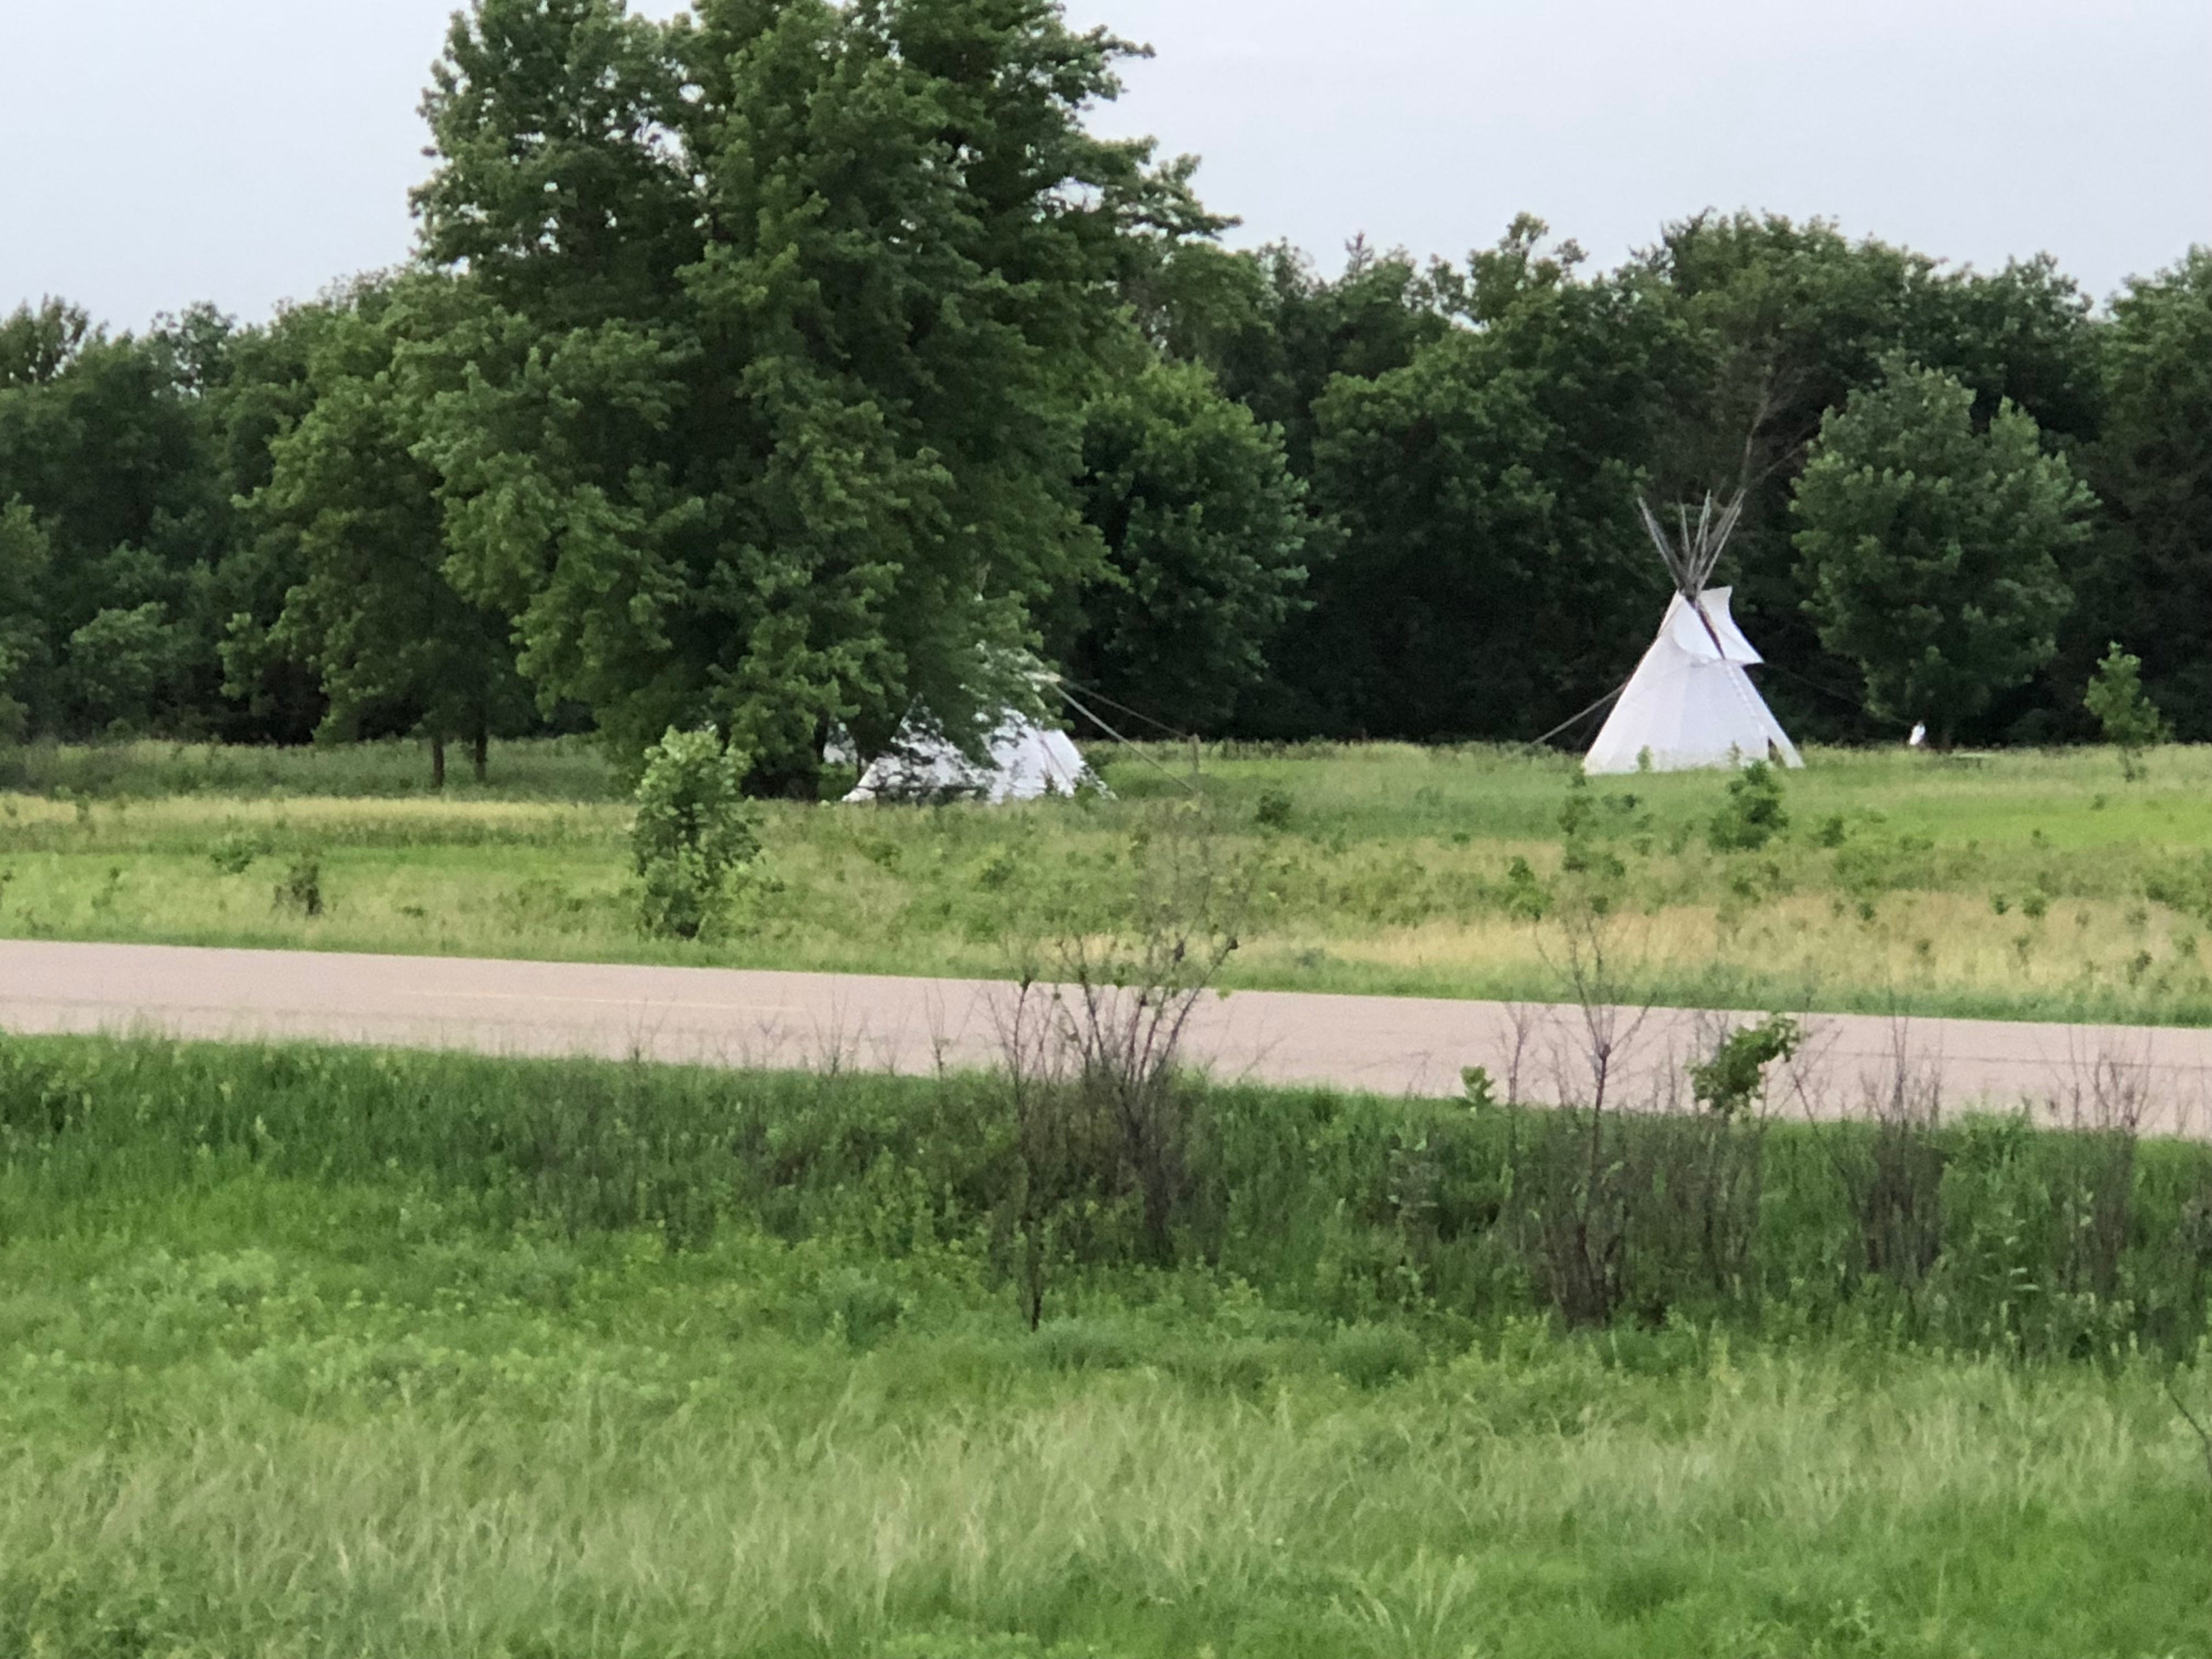 These teepees are available to stay in overnight.